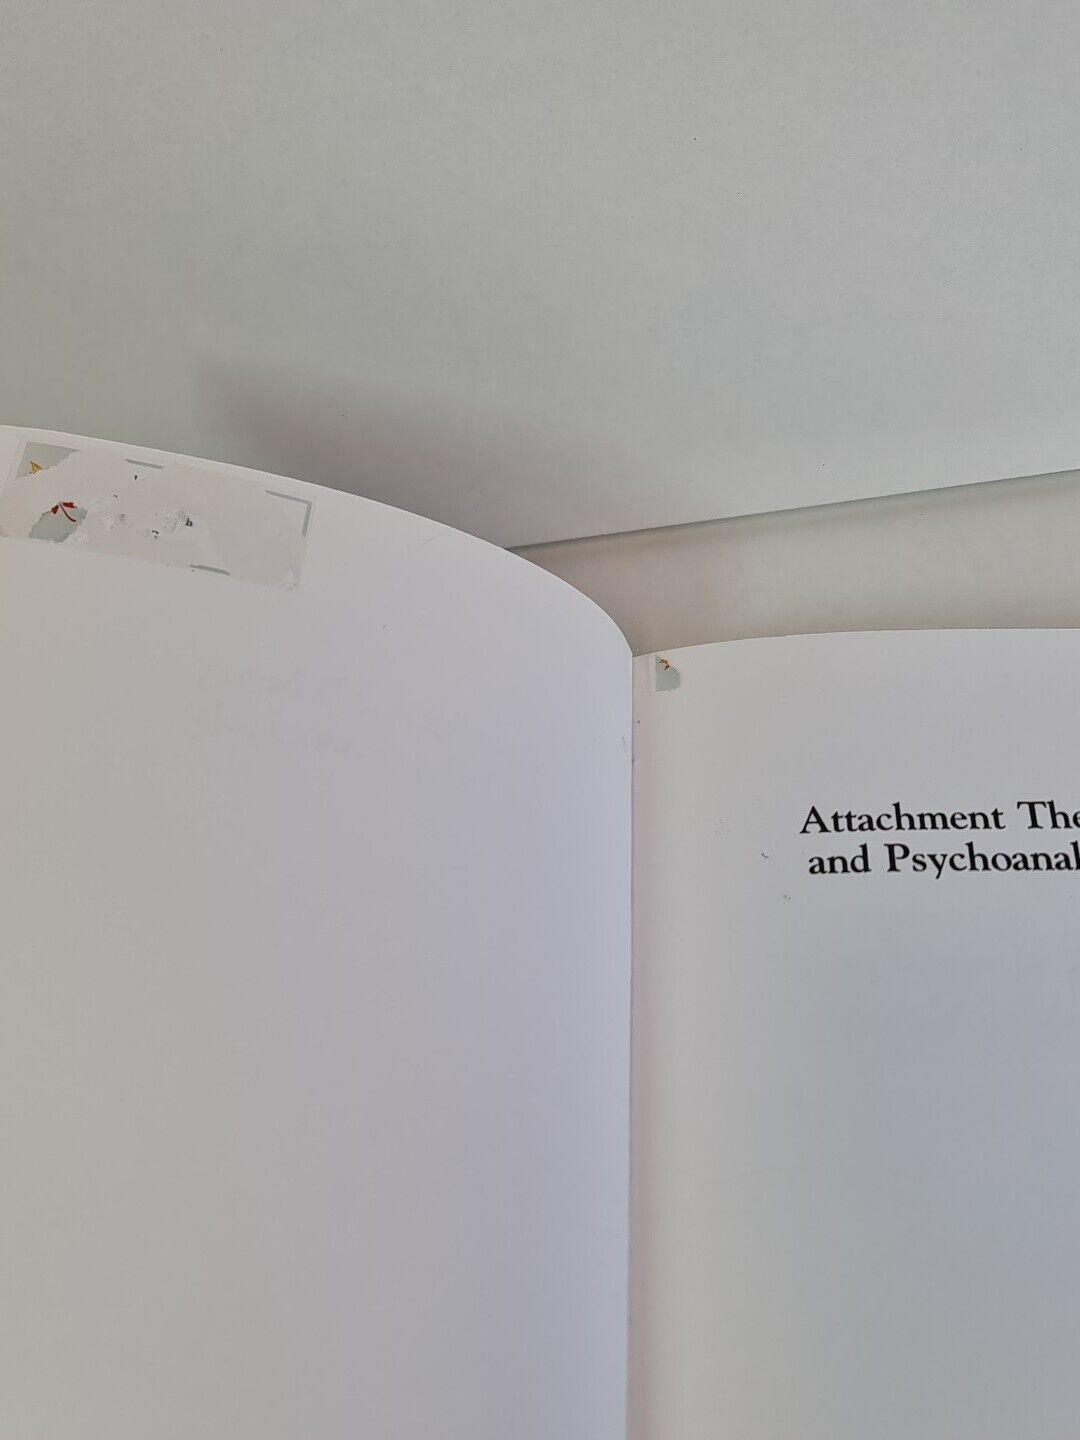 Attachment Theory and Psychoanalysis by Peter Fonagy (2001)